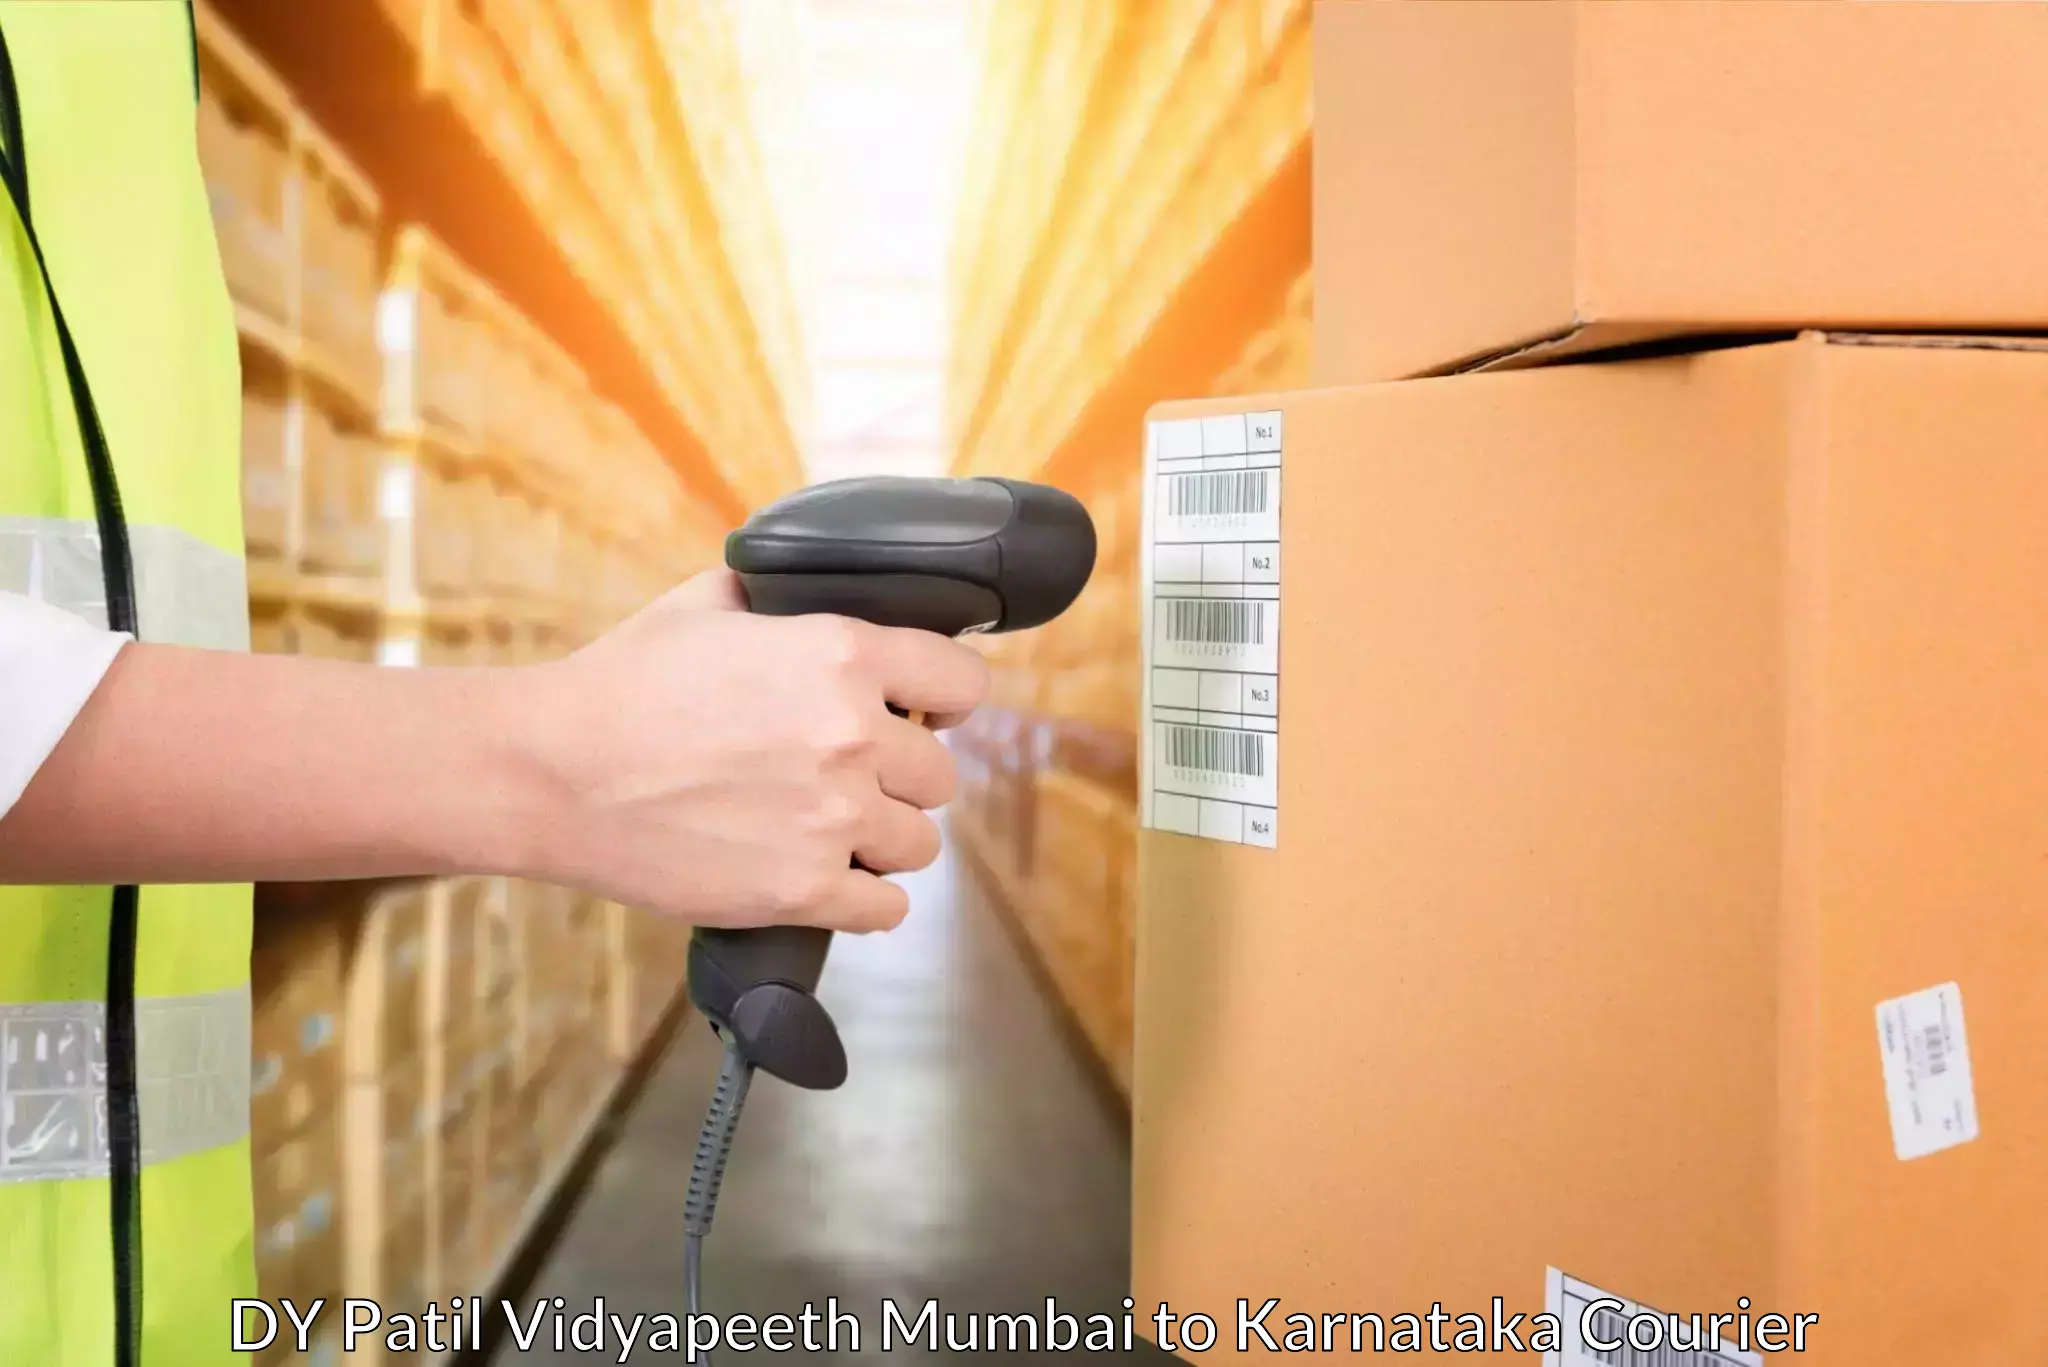 Nationwide courier service DY Patil Vidyapeeth Mumbai to Afzalpur